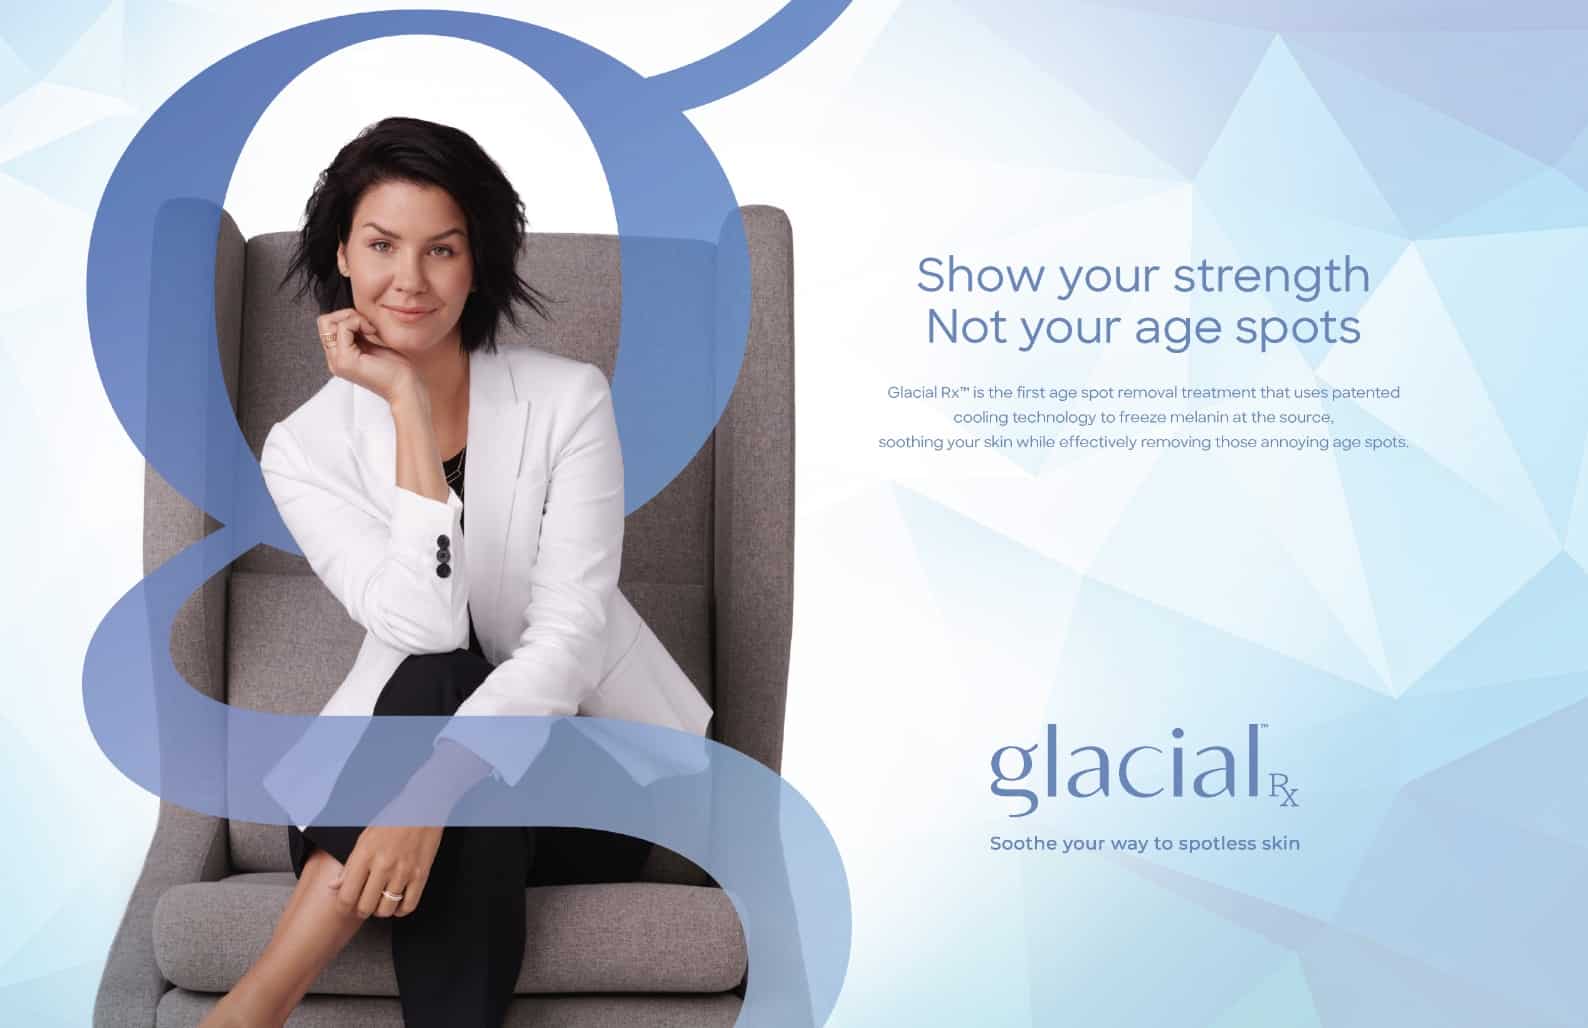 Glacial Rx advertisement with brunette woman